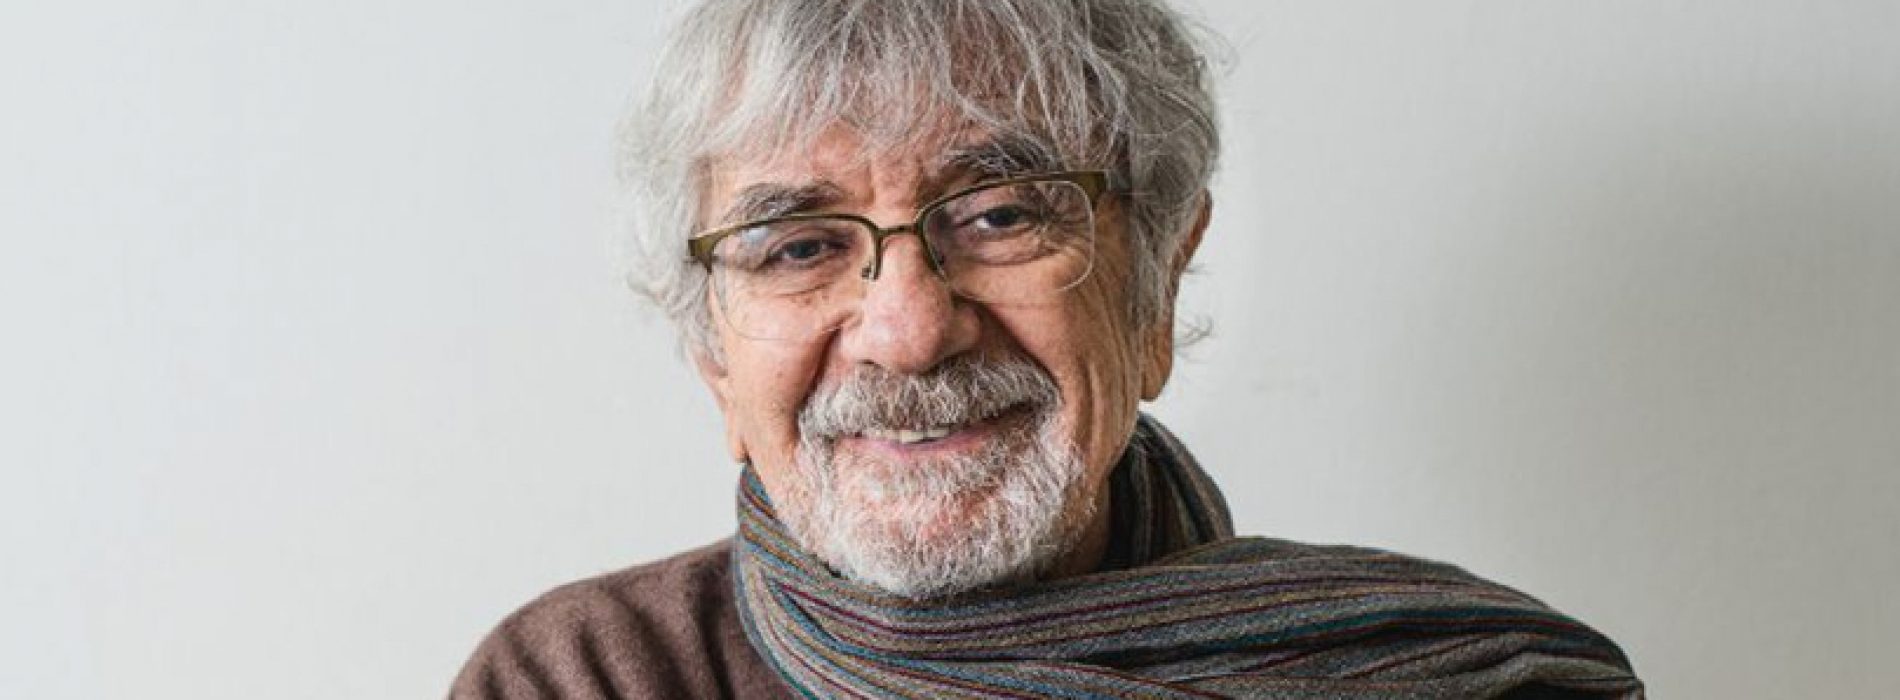 At the age of 92, chile's prominent biologist and writer Humberto Maturana died